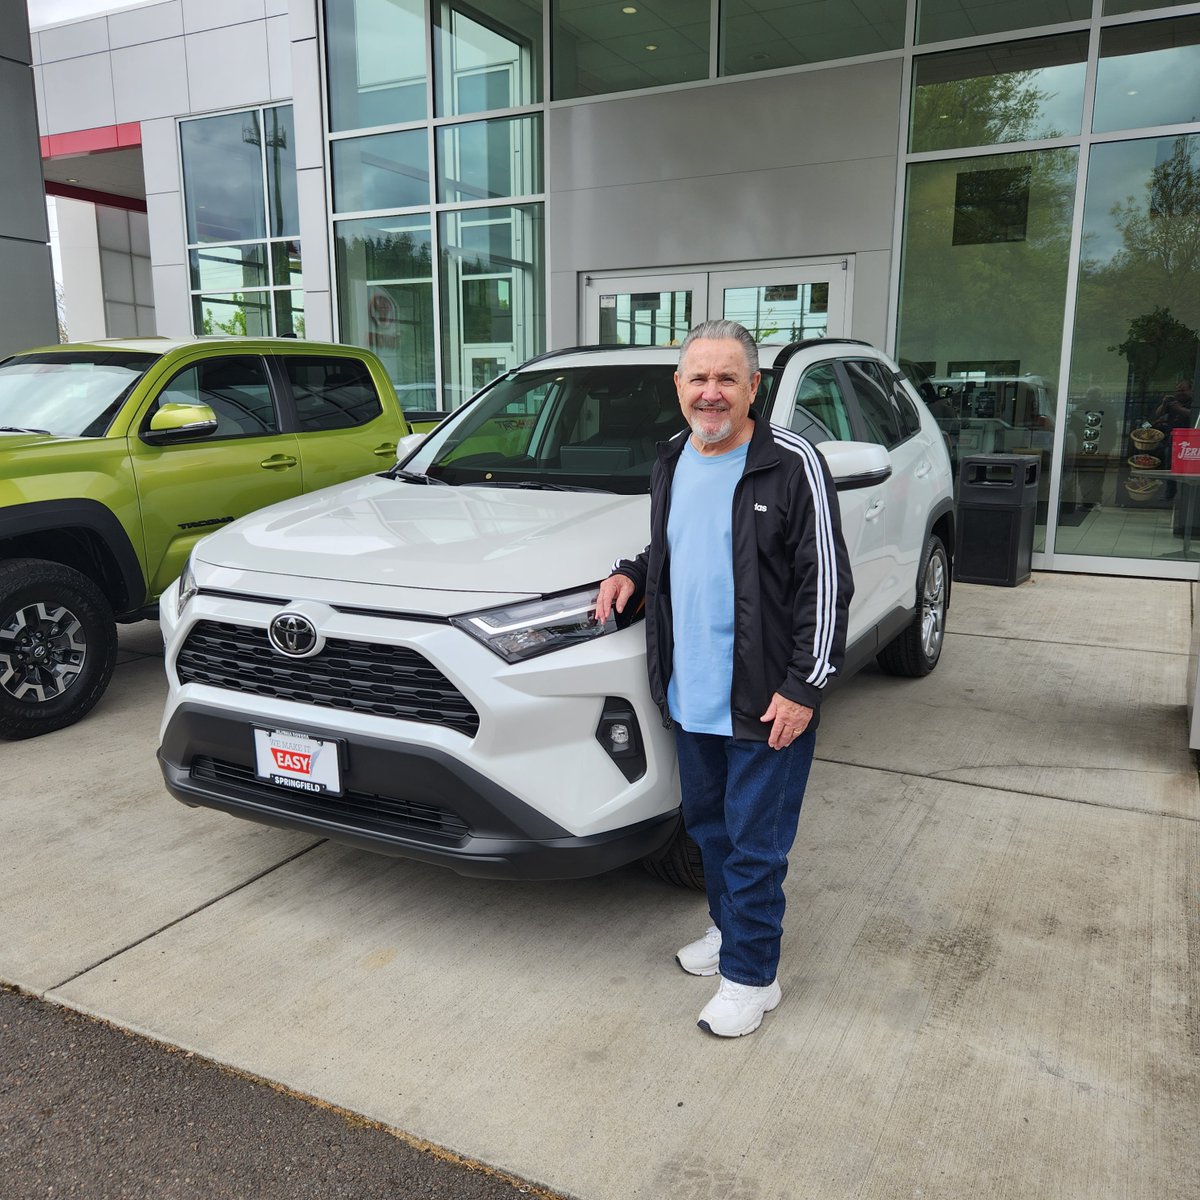 With an assist from Toyota Sales Representative, Oliver Peck, here is Russell with his new 2023 #Toyota #RAV4 XLE Premium!
Thank you for your business, Russell! 
#Customerappreciation #Customersforlife #Wemakeiteasy #Lithia #Springfield #Happycustomer